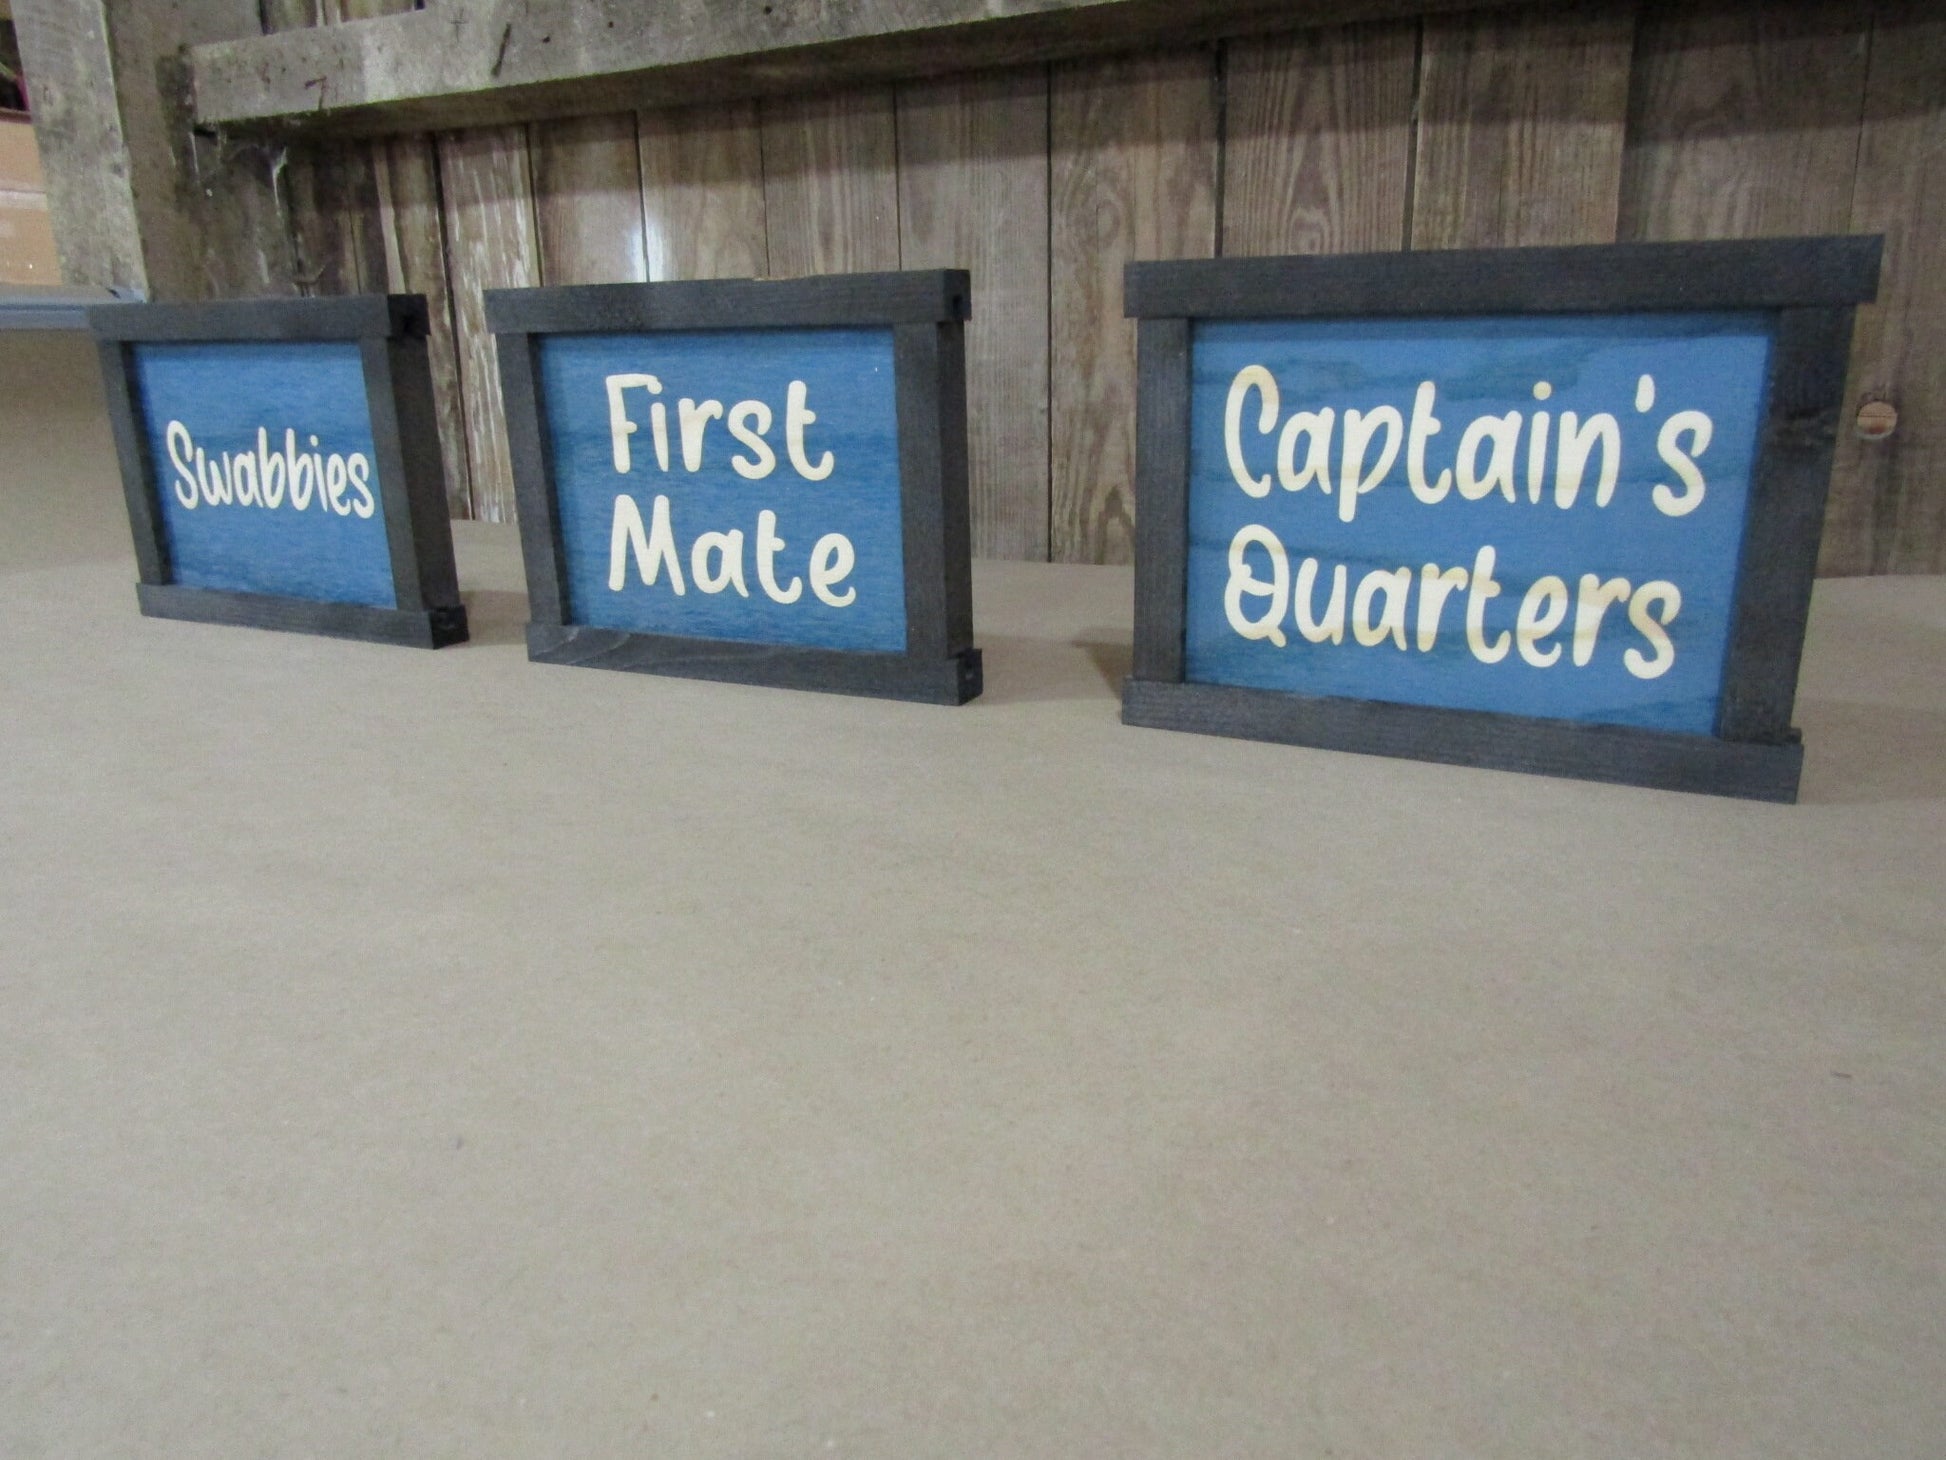 Wooden Custom Printed Signs Set of 3 Matching Signage Uvprinted Framed Decor Handmade Nautical Captains Quarters First Mate Boat Theme Lake